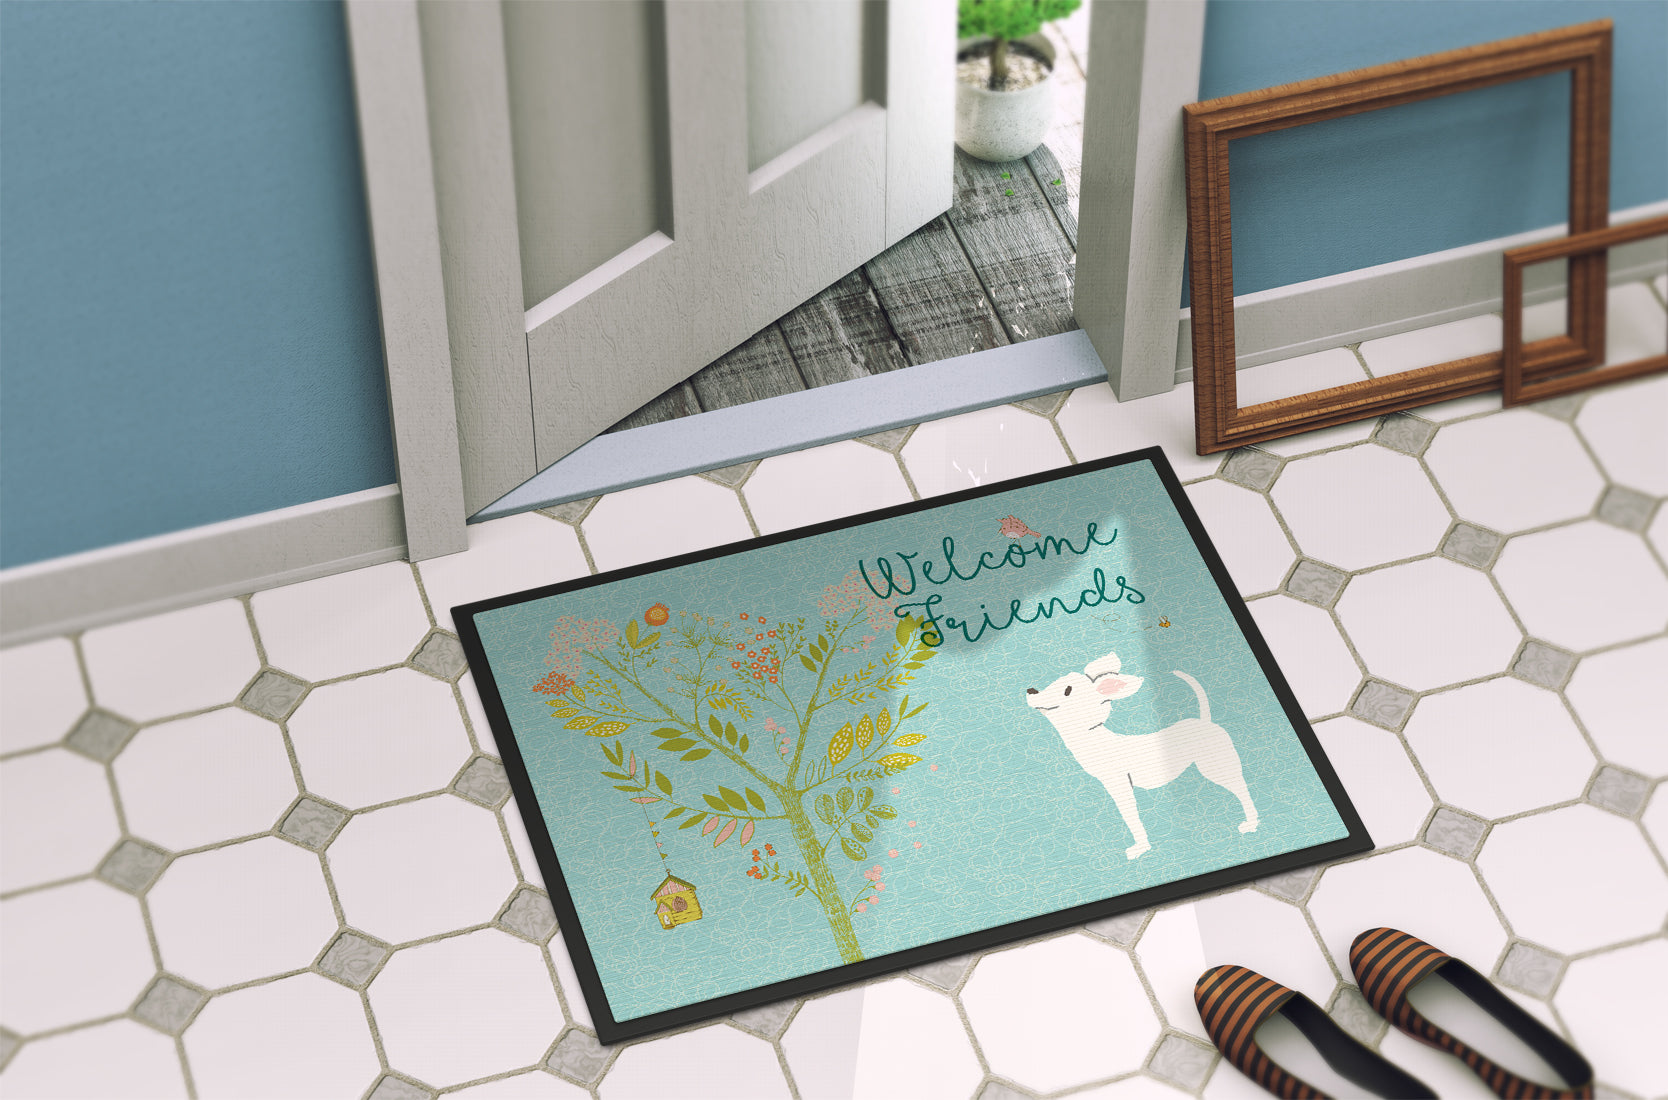 Welcome Friends White Chihuahua Indoor or Outdoor Mat 18x27 BB7629MAT - the-store.com